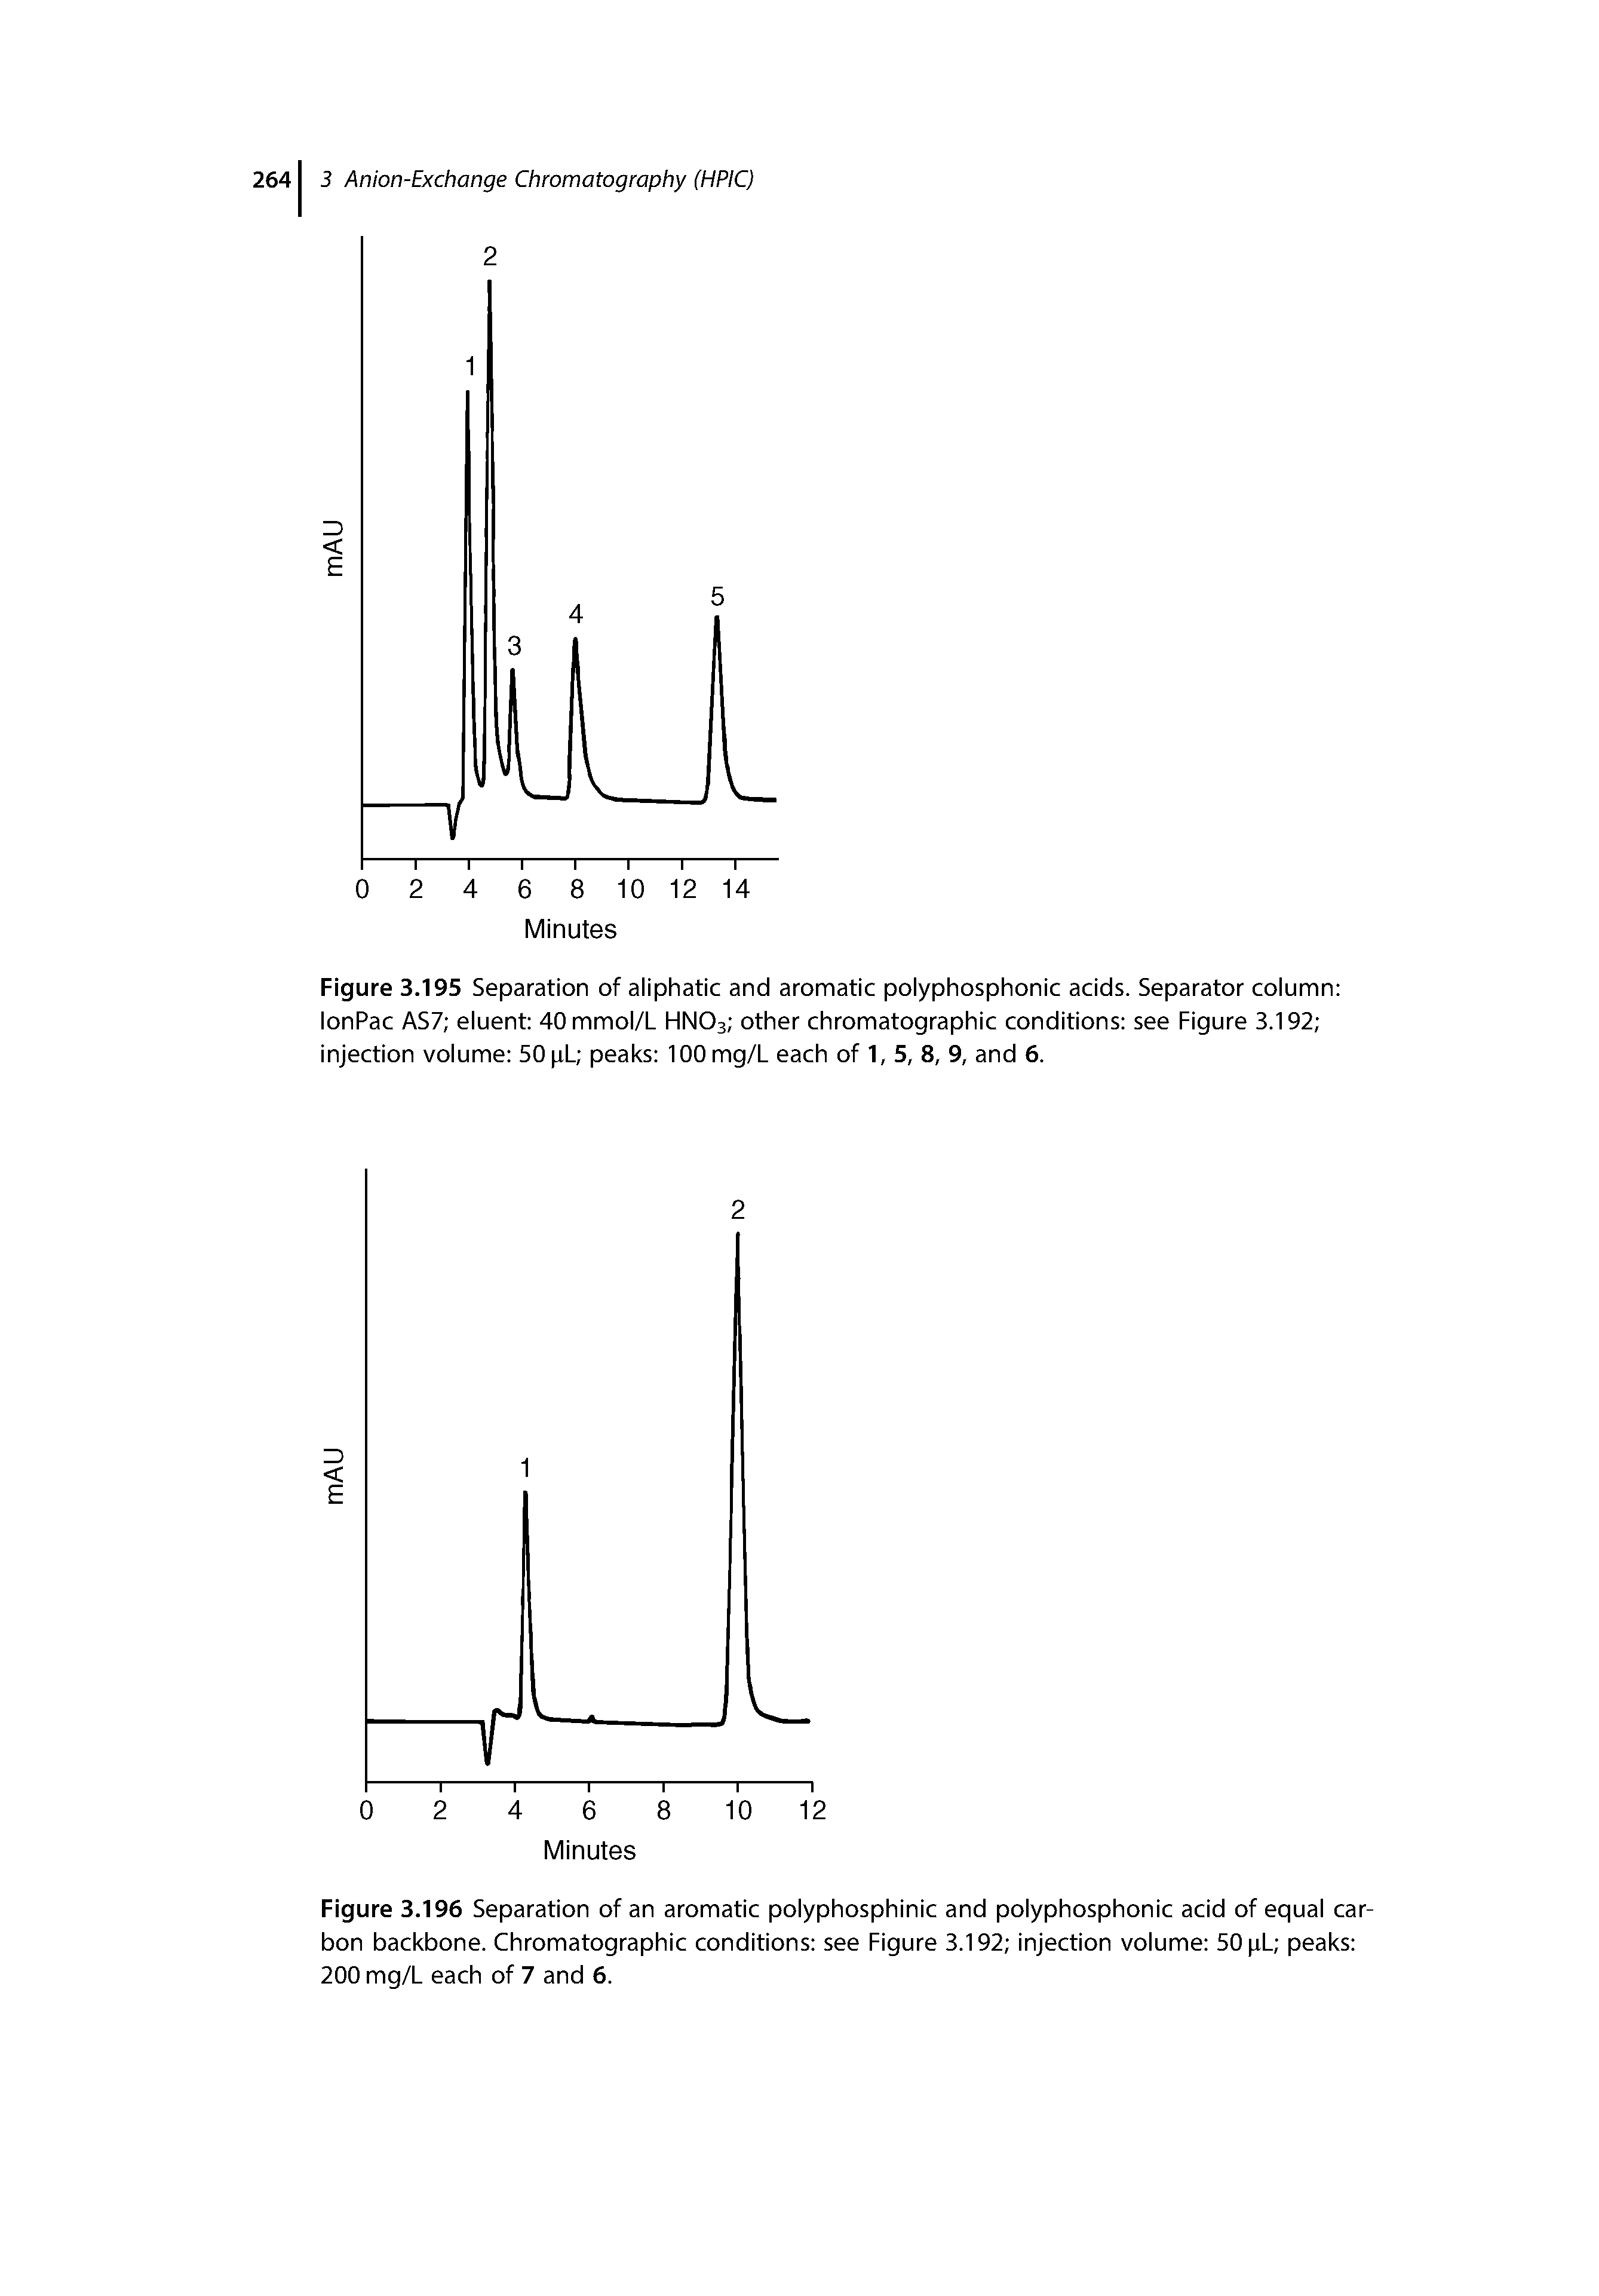 Figure 3.195 Separation of aliphatic and aromatic polyphosphonic acids. Separator column lonPac AS7 eluent 40mmol/L HNO3 other chromatographic conditions see Figure 3.192 injection volume 50 pL peaks lOOmg/L each of 1, 5, 8, 9, and 6.